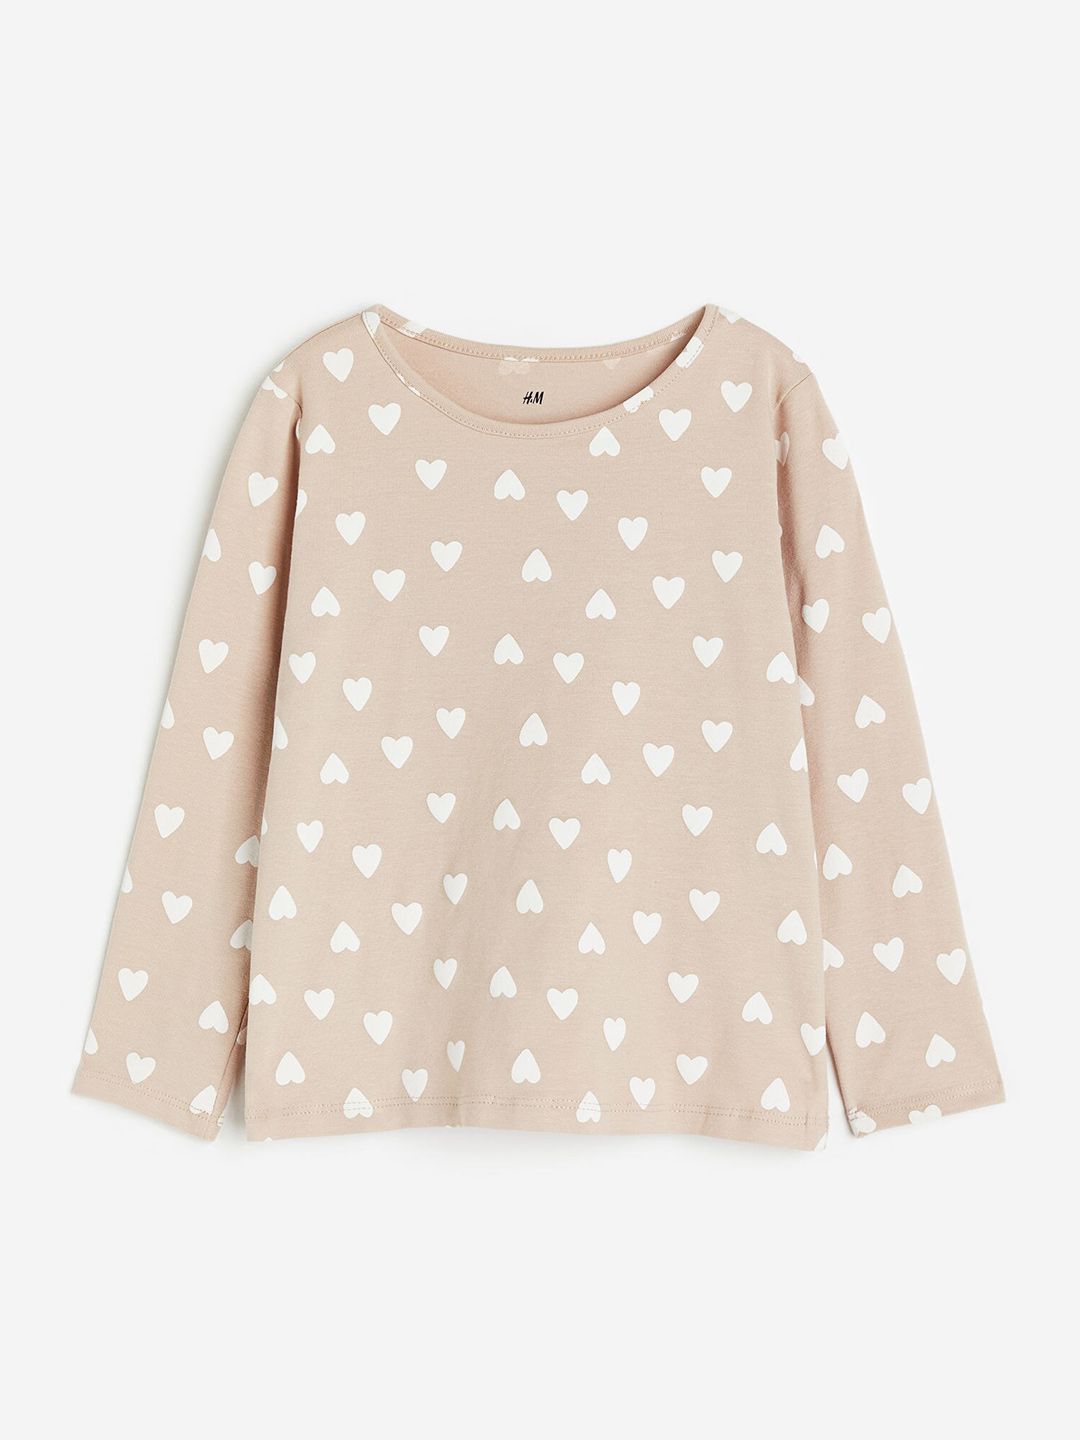 H&M Girls Printed Jersey Tops Price in India